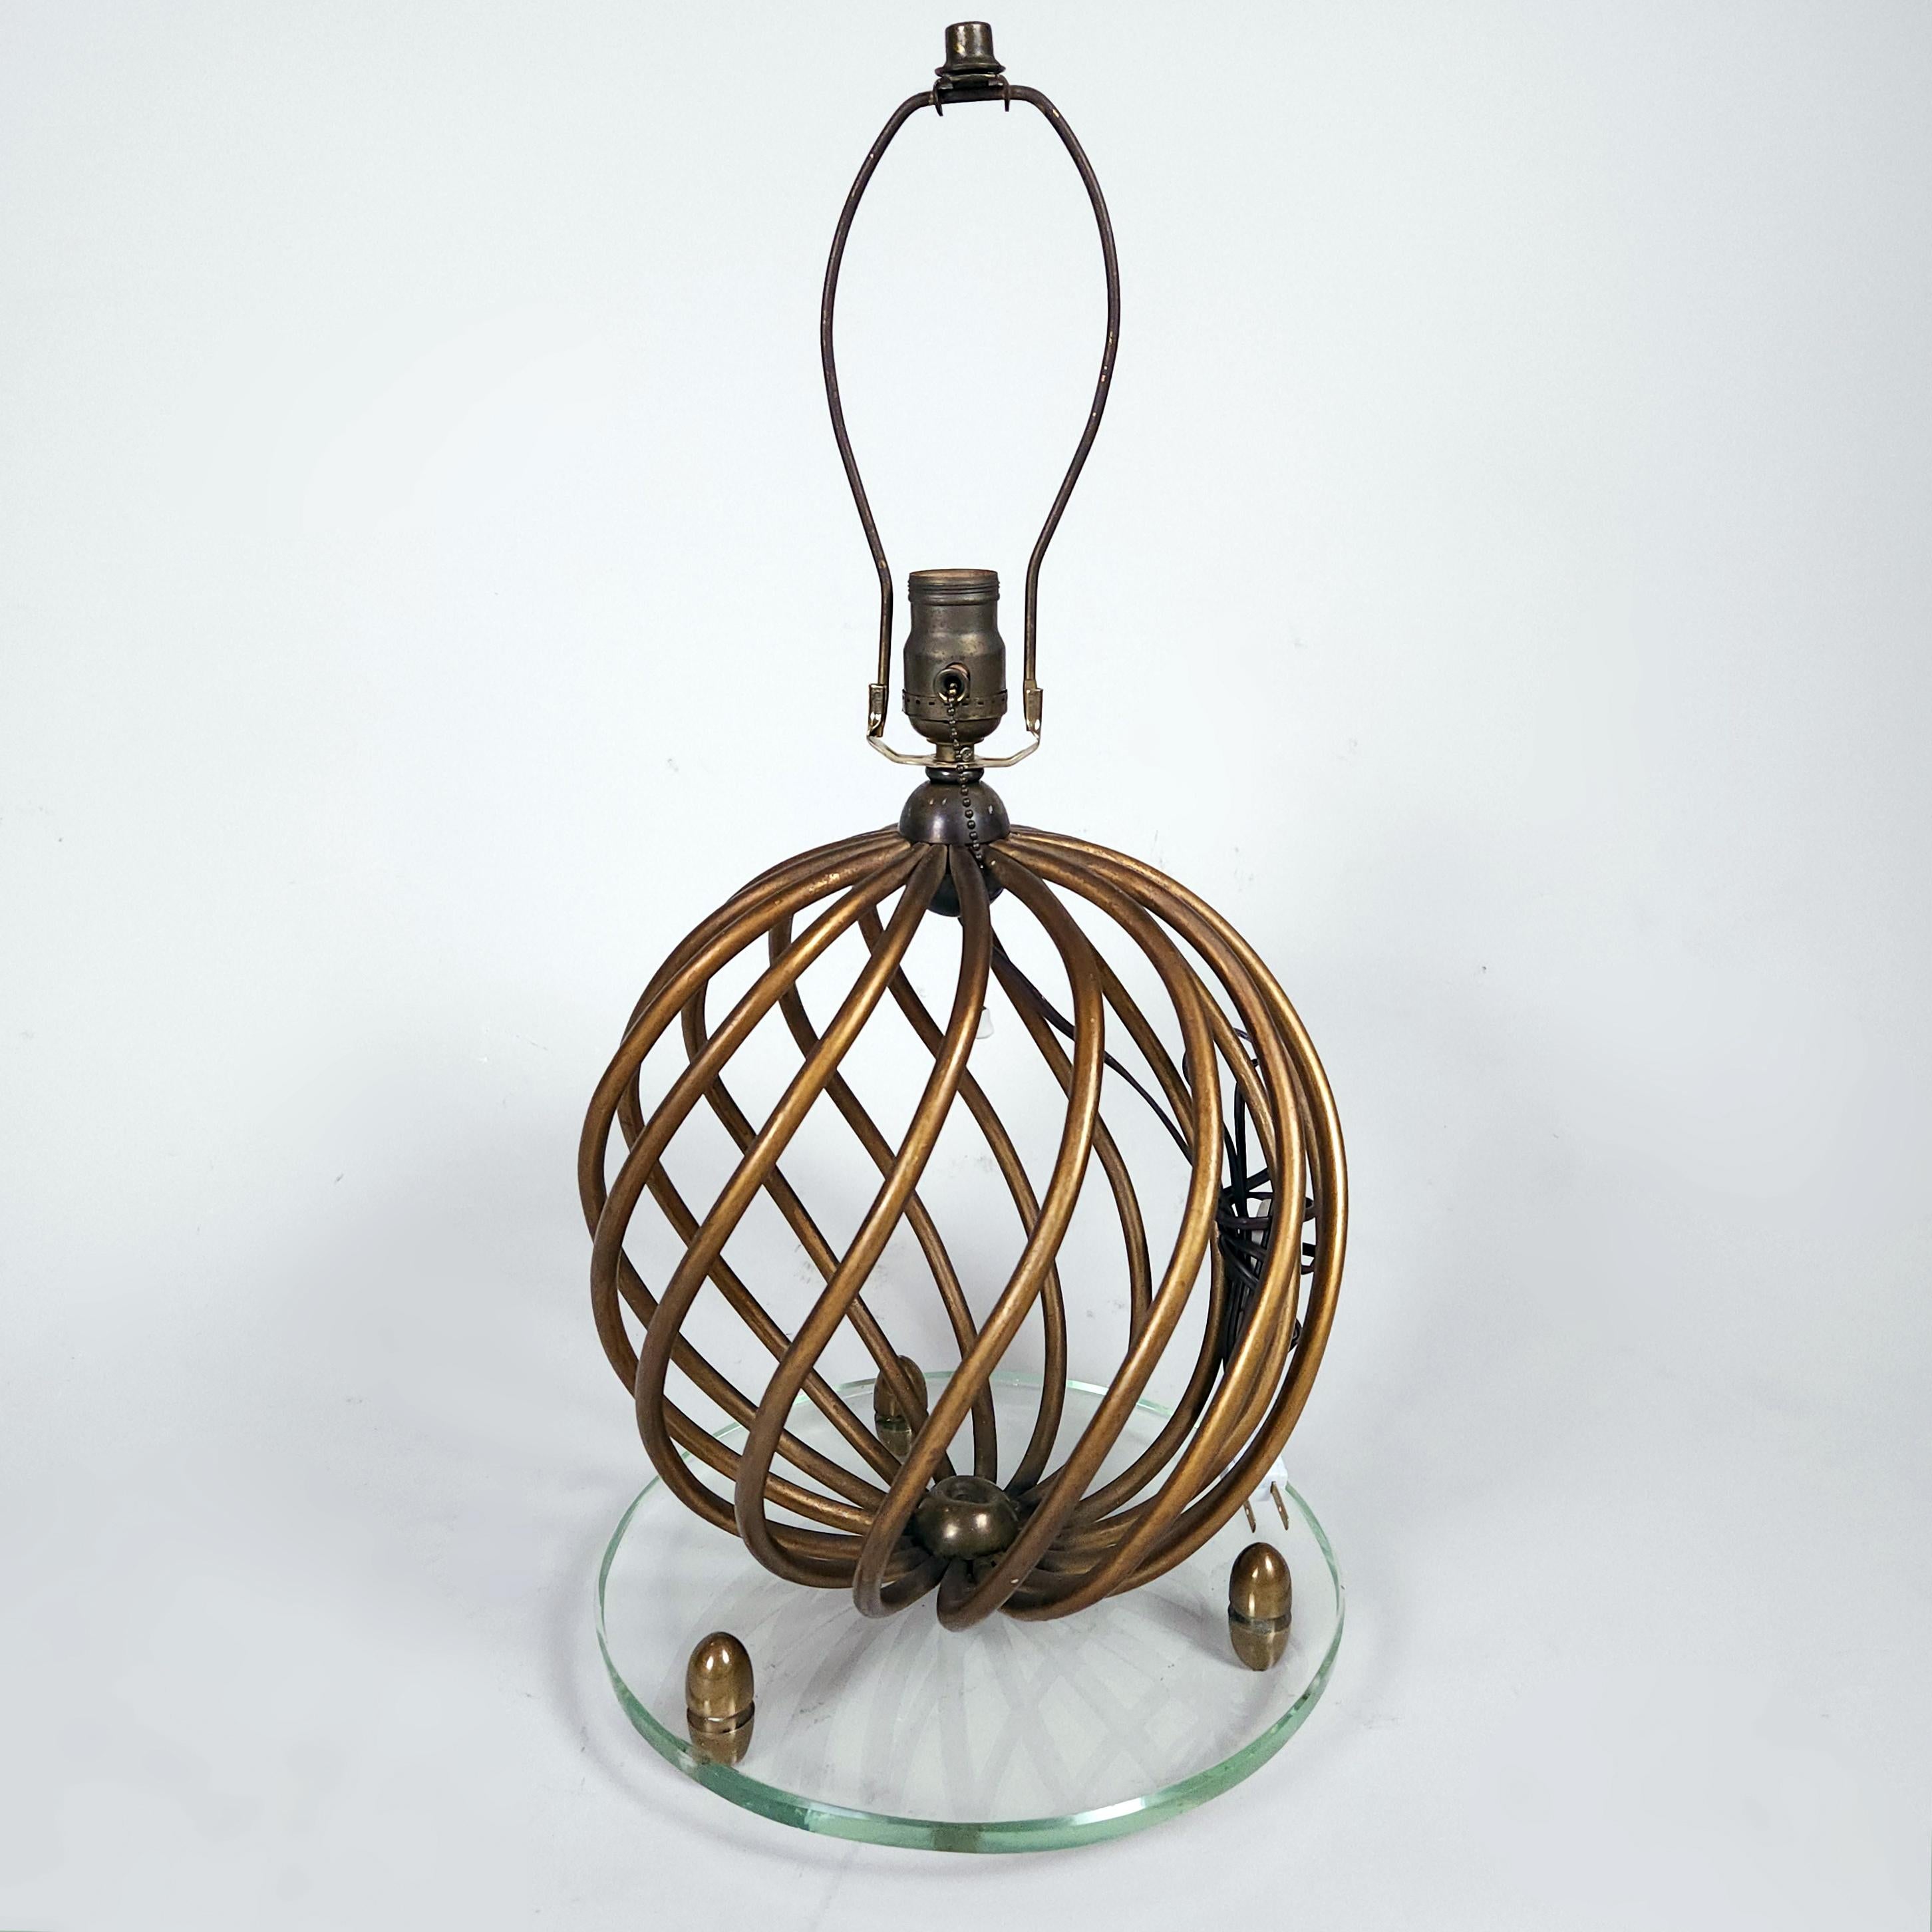 A Mexican 1960's gilt wrought iron table lamp in the style of Jean Royère. The sphere-shaped whirl design is set over its original glass base.